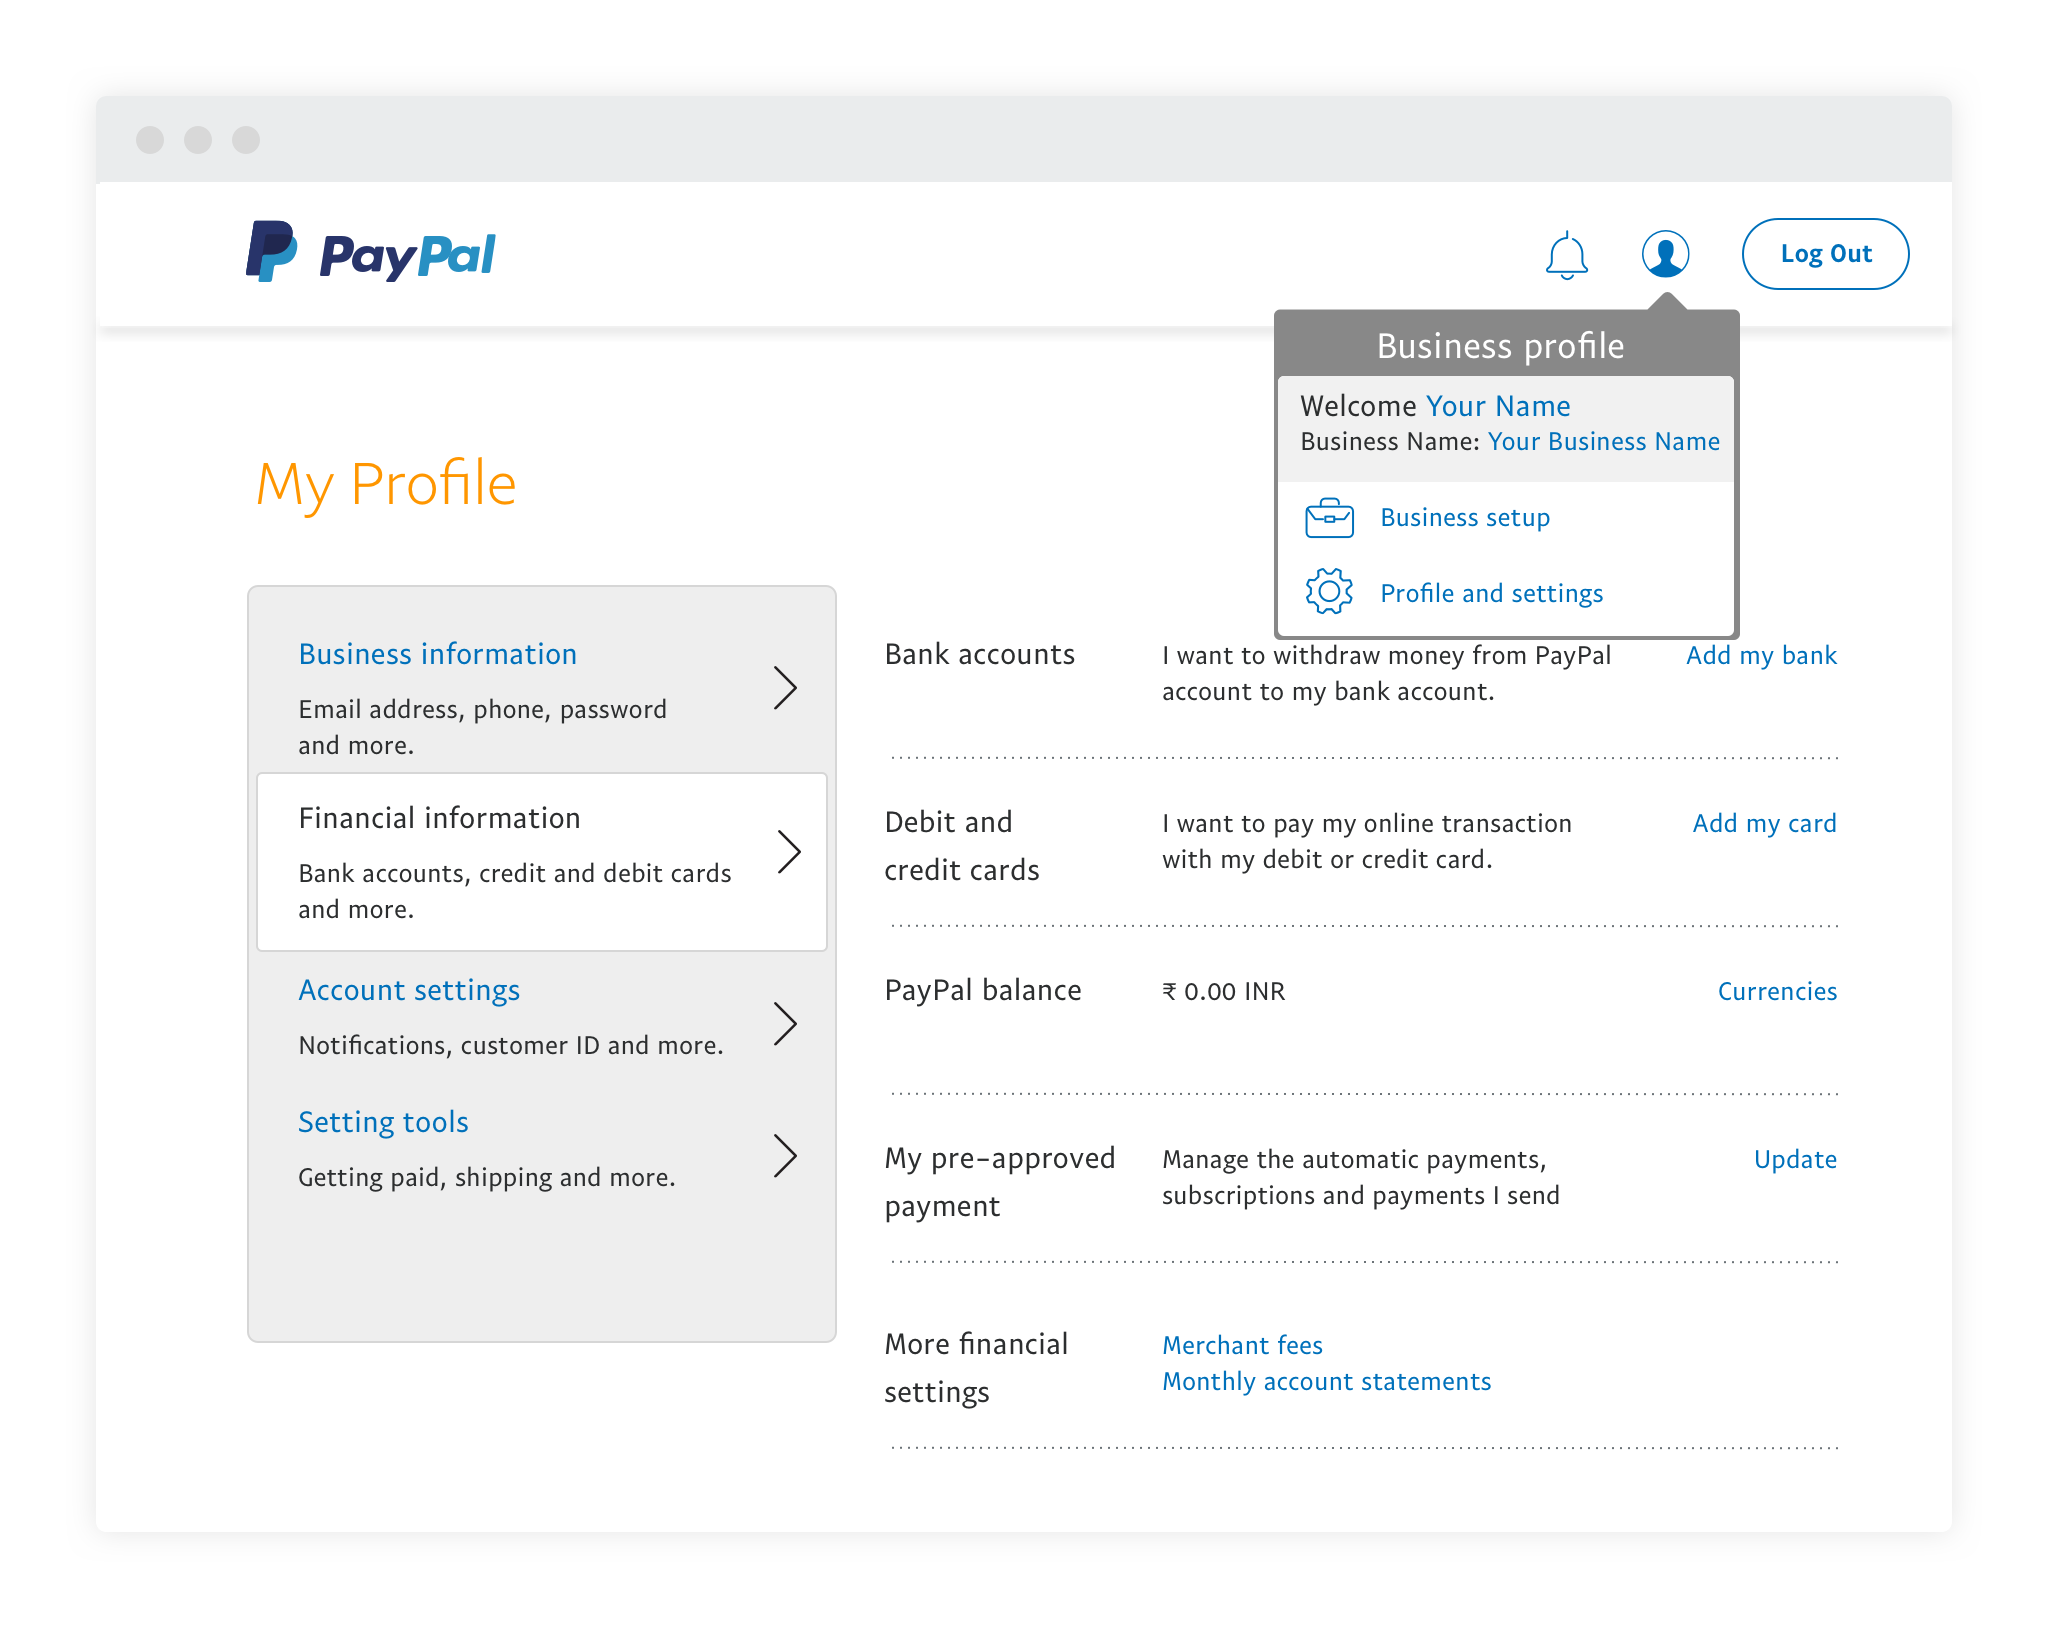 How do I confirm my identity? (CIP) | PayPal IN